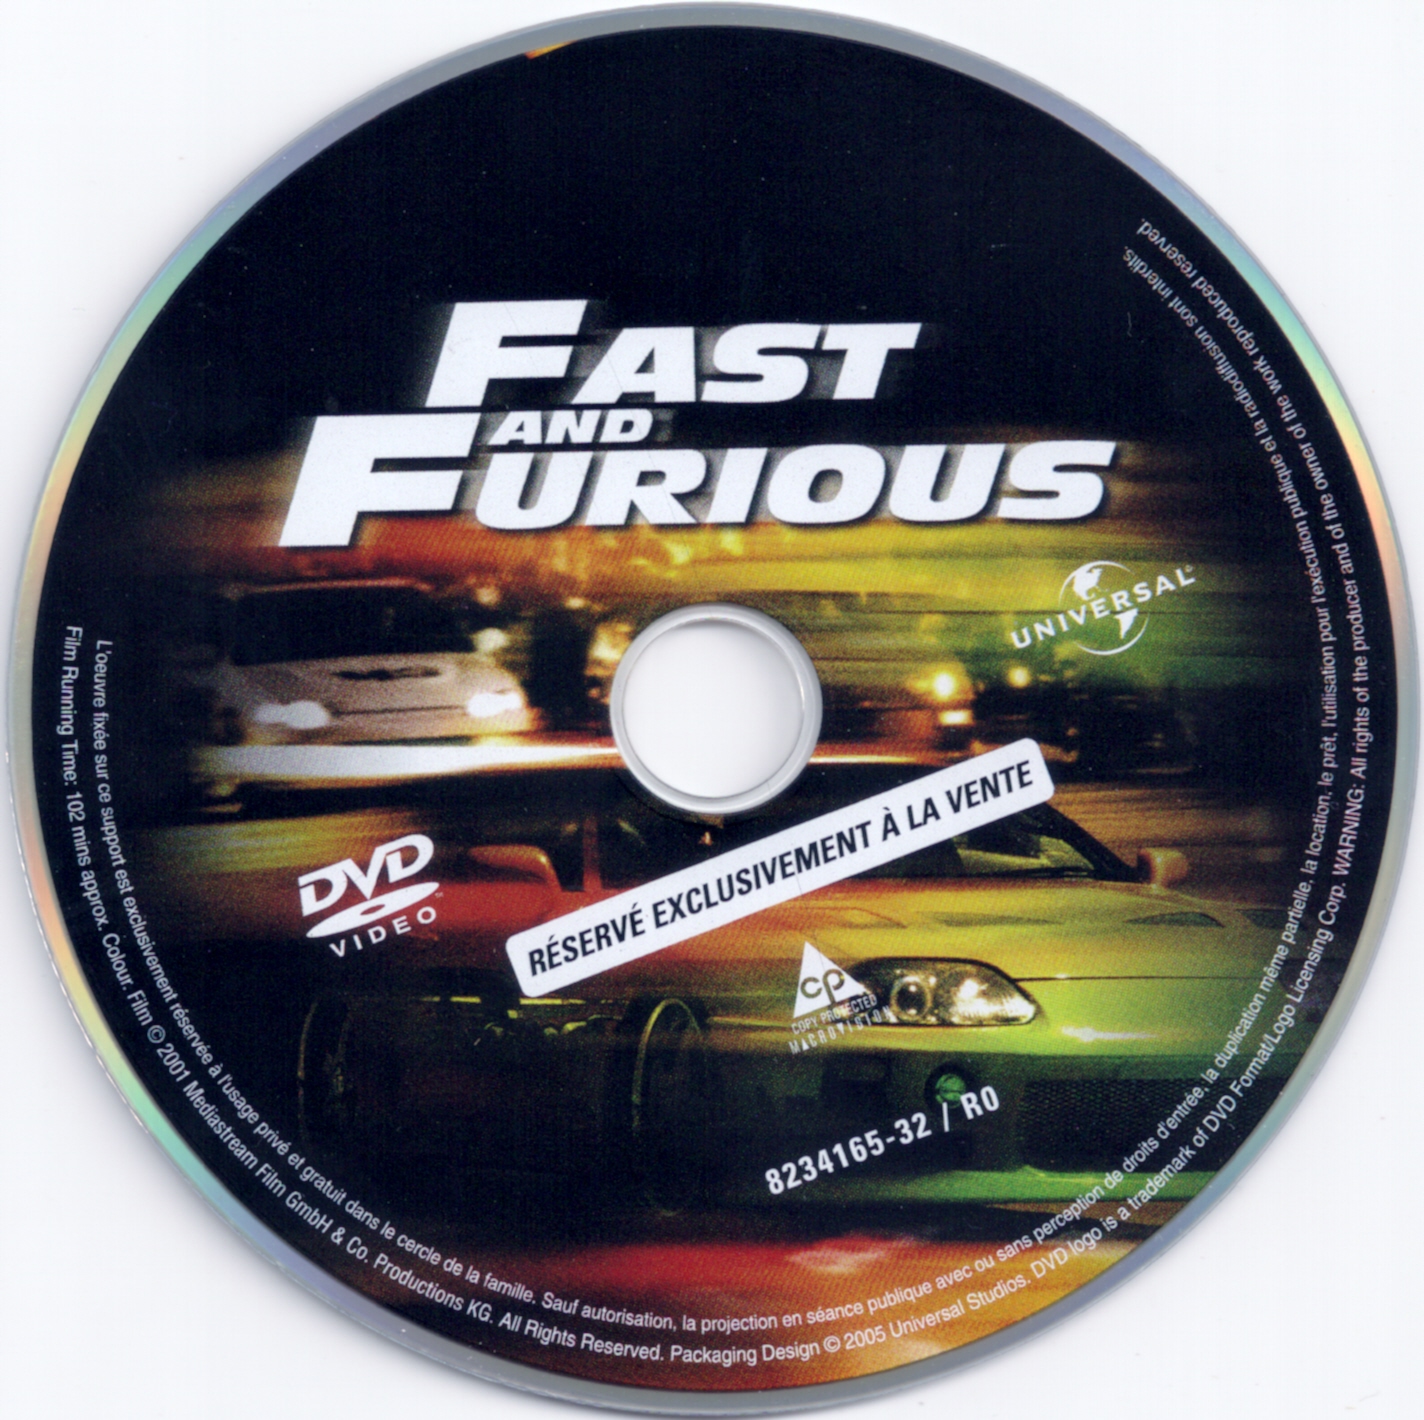 Fast and furious v2